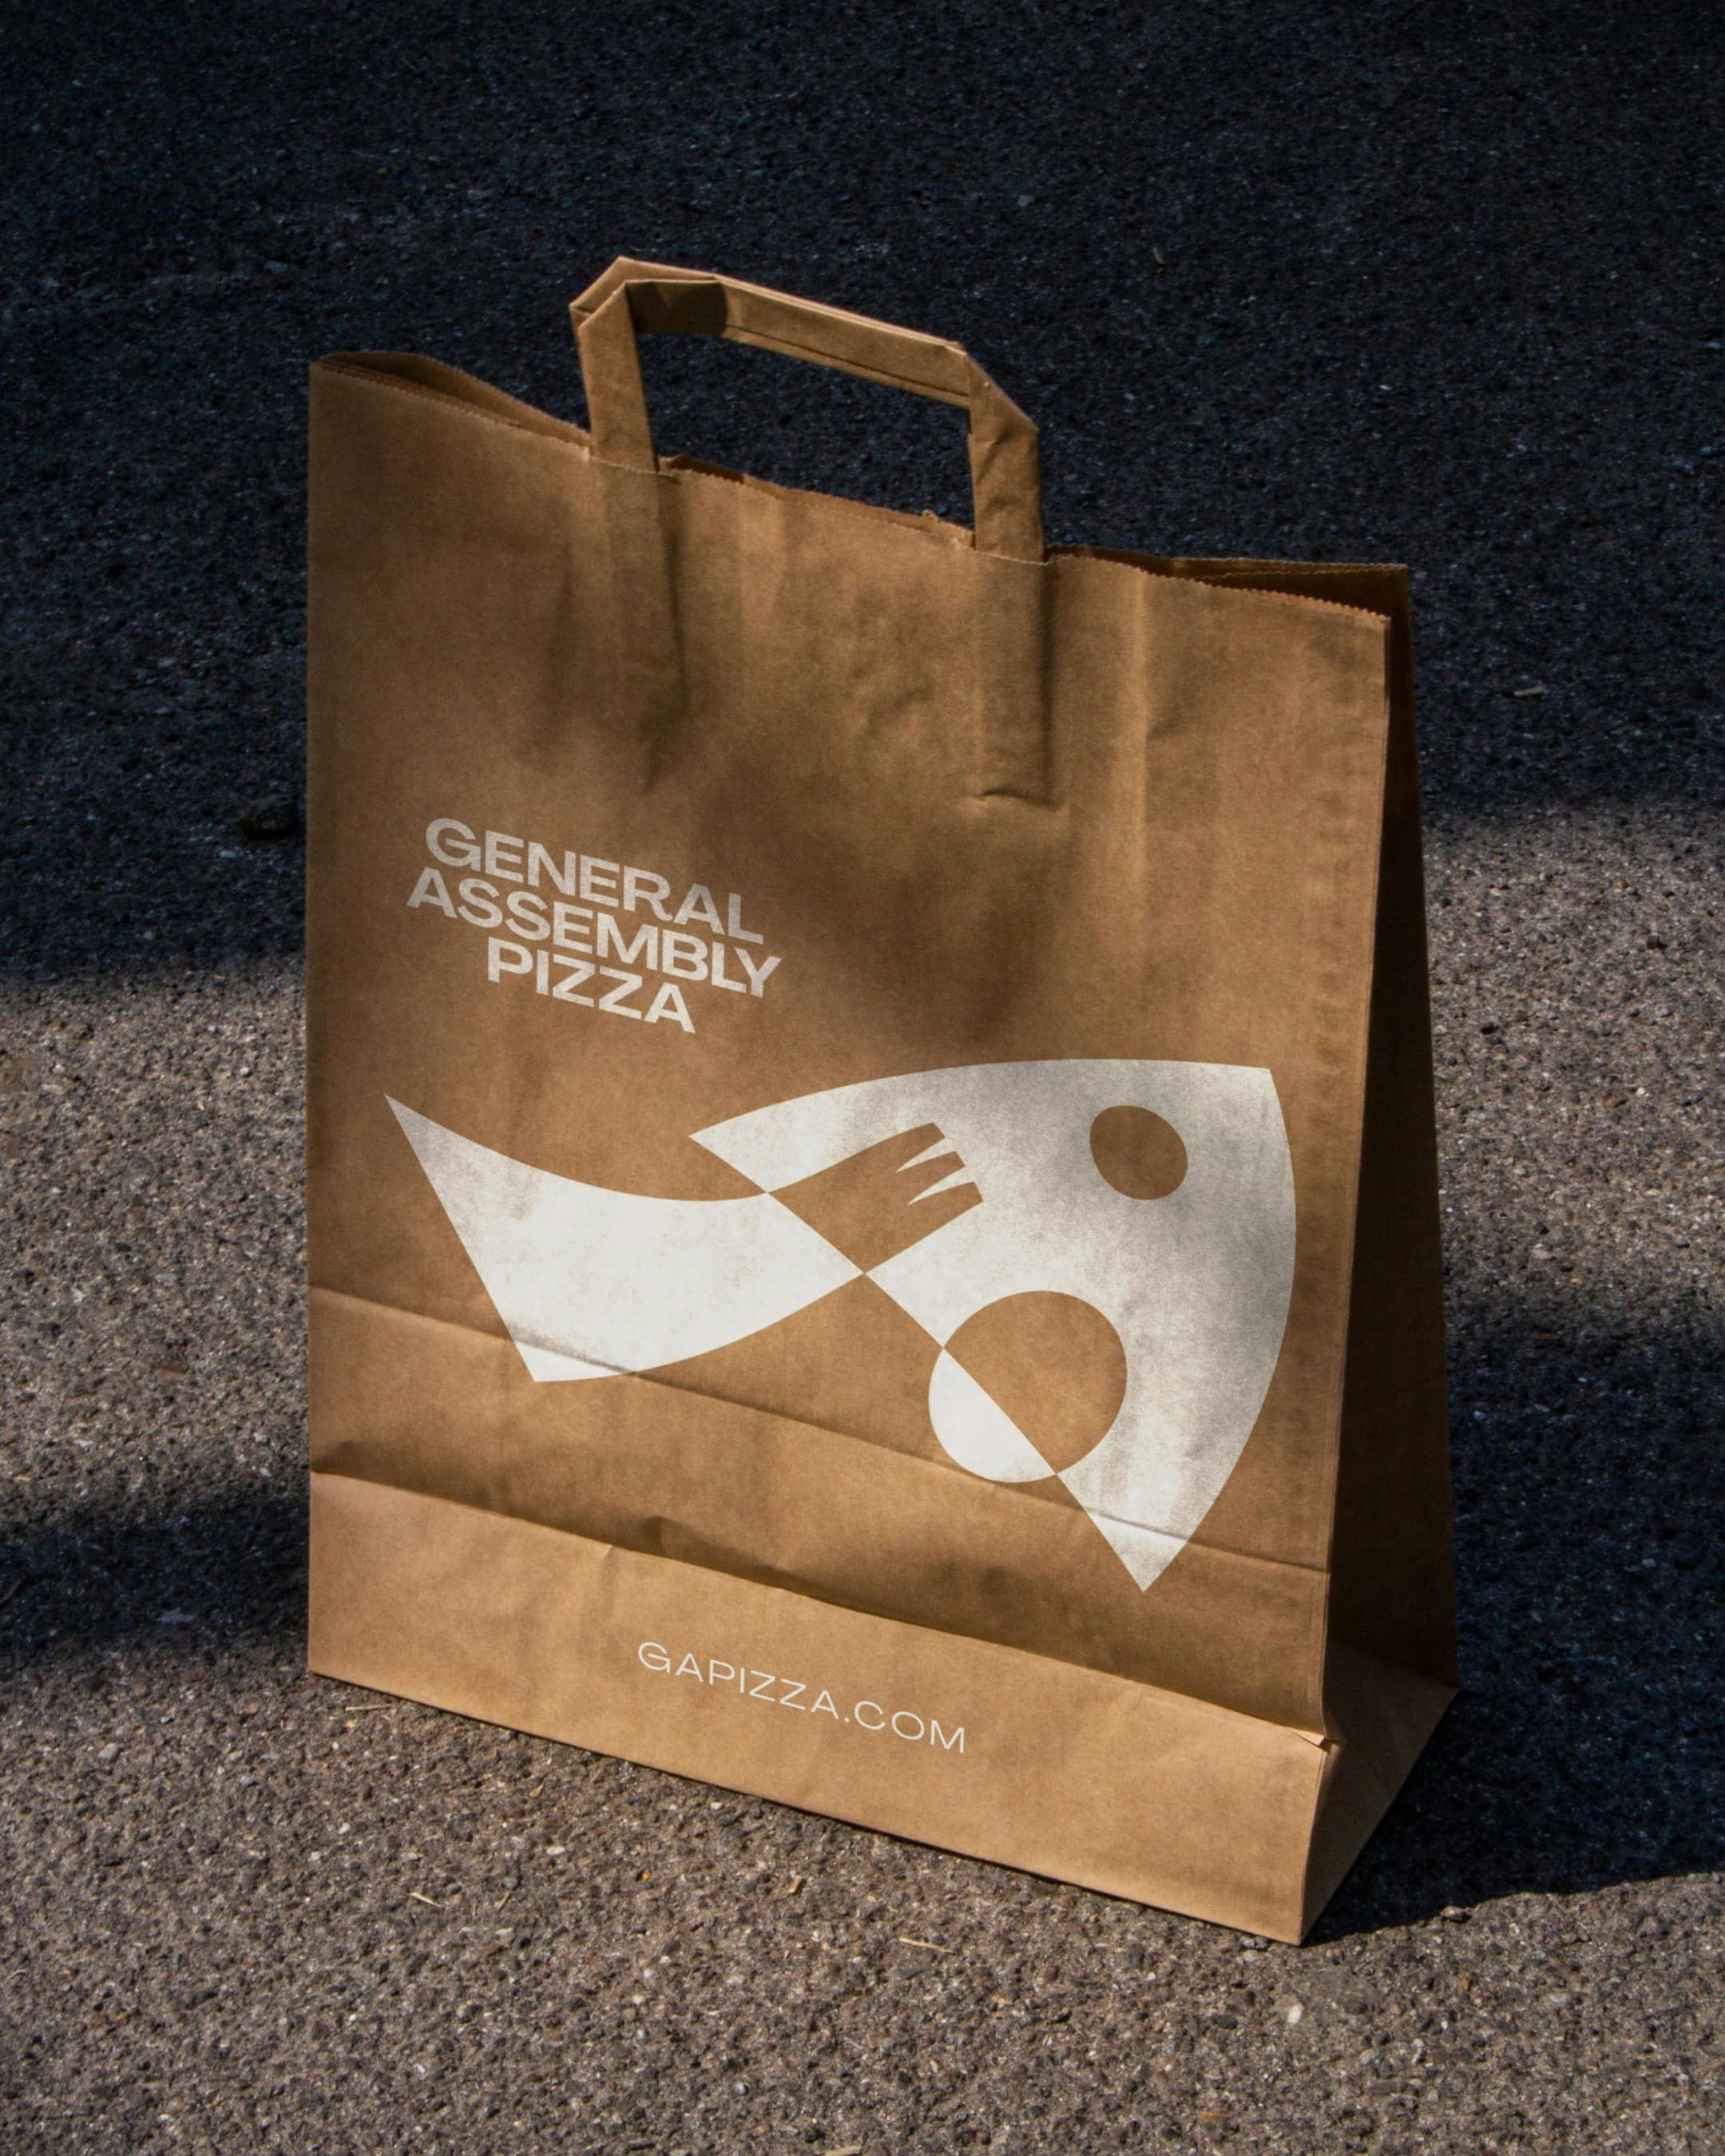 Packaging of takeout bag design for General Assembly Pizza.